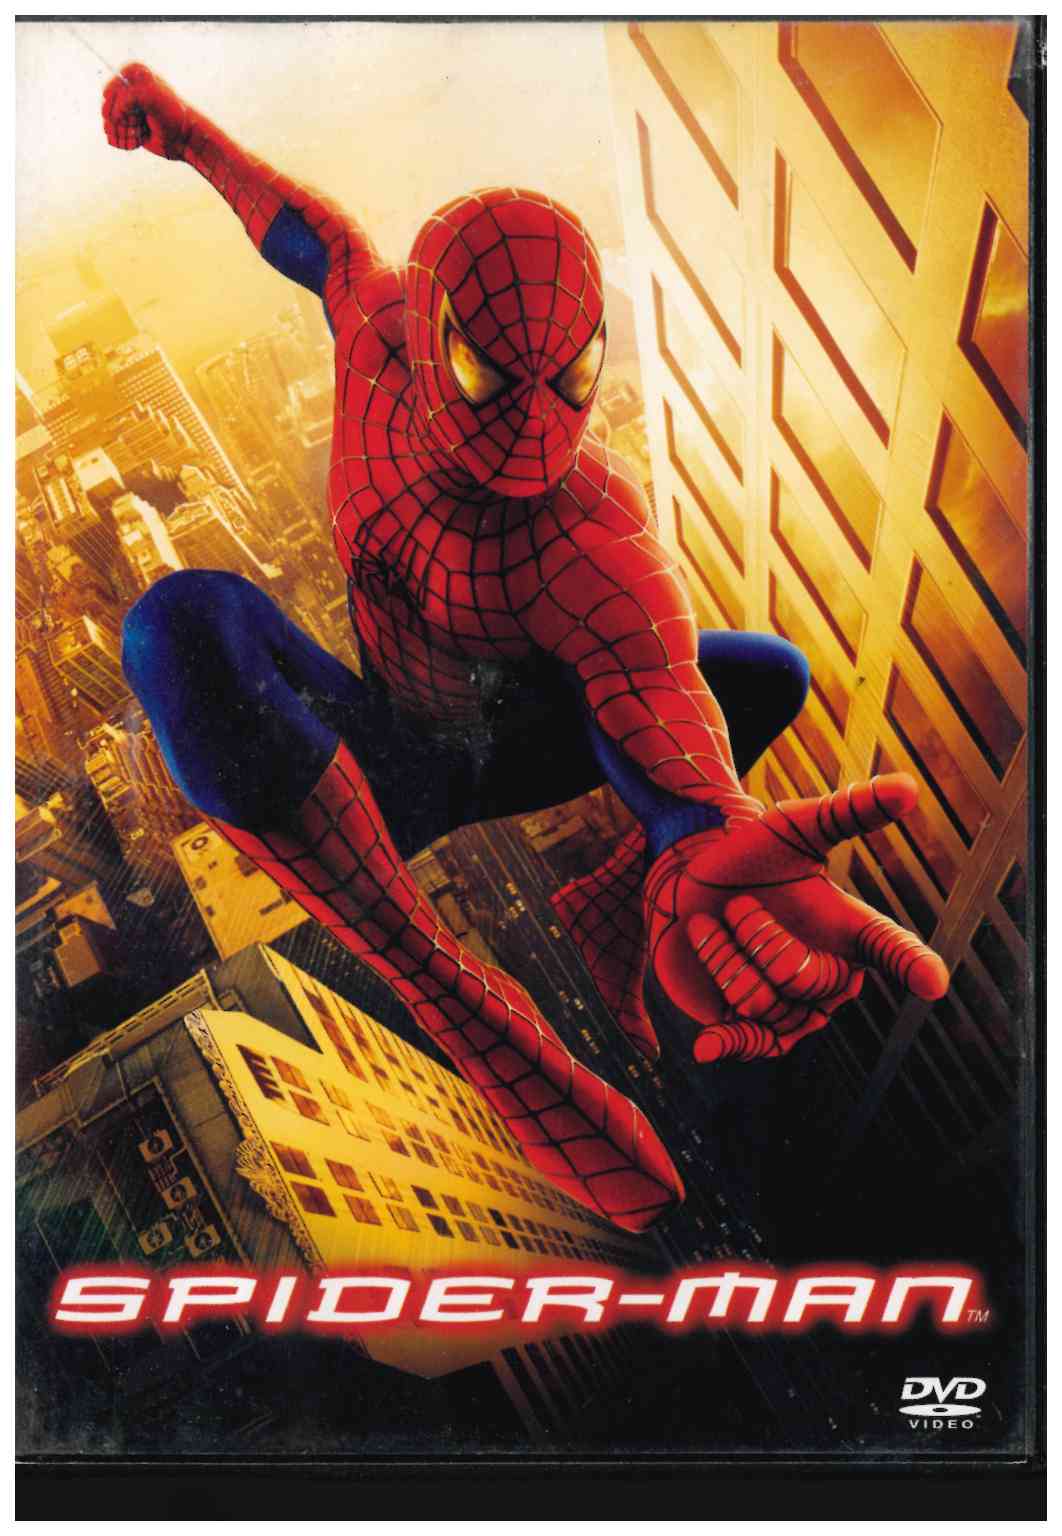 Spiderman. Columbia Pictures 2002. Motion Picture (2 dvds)